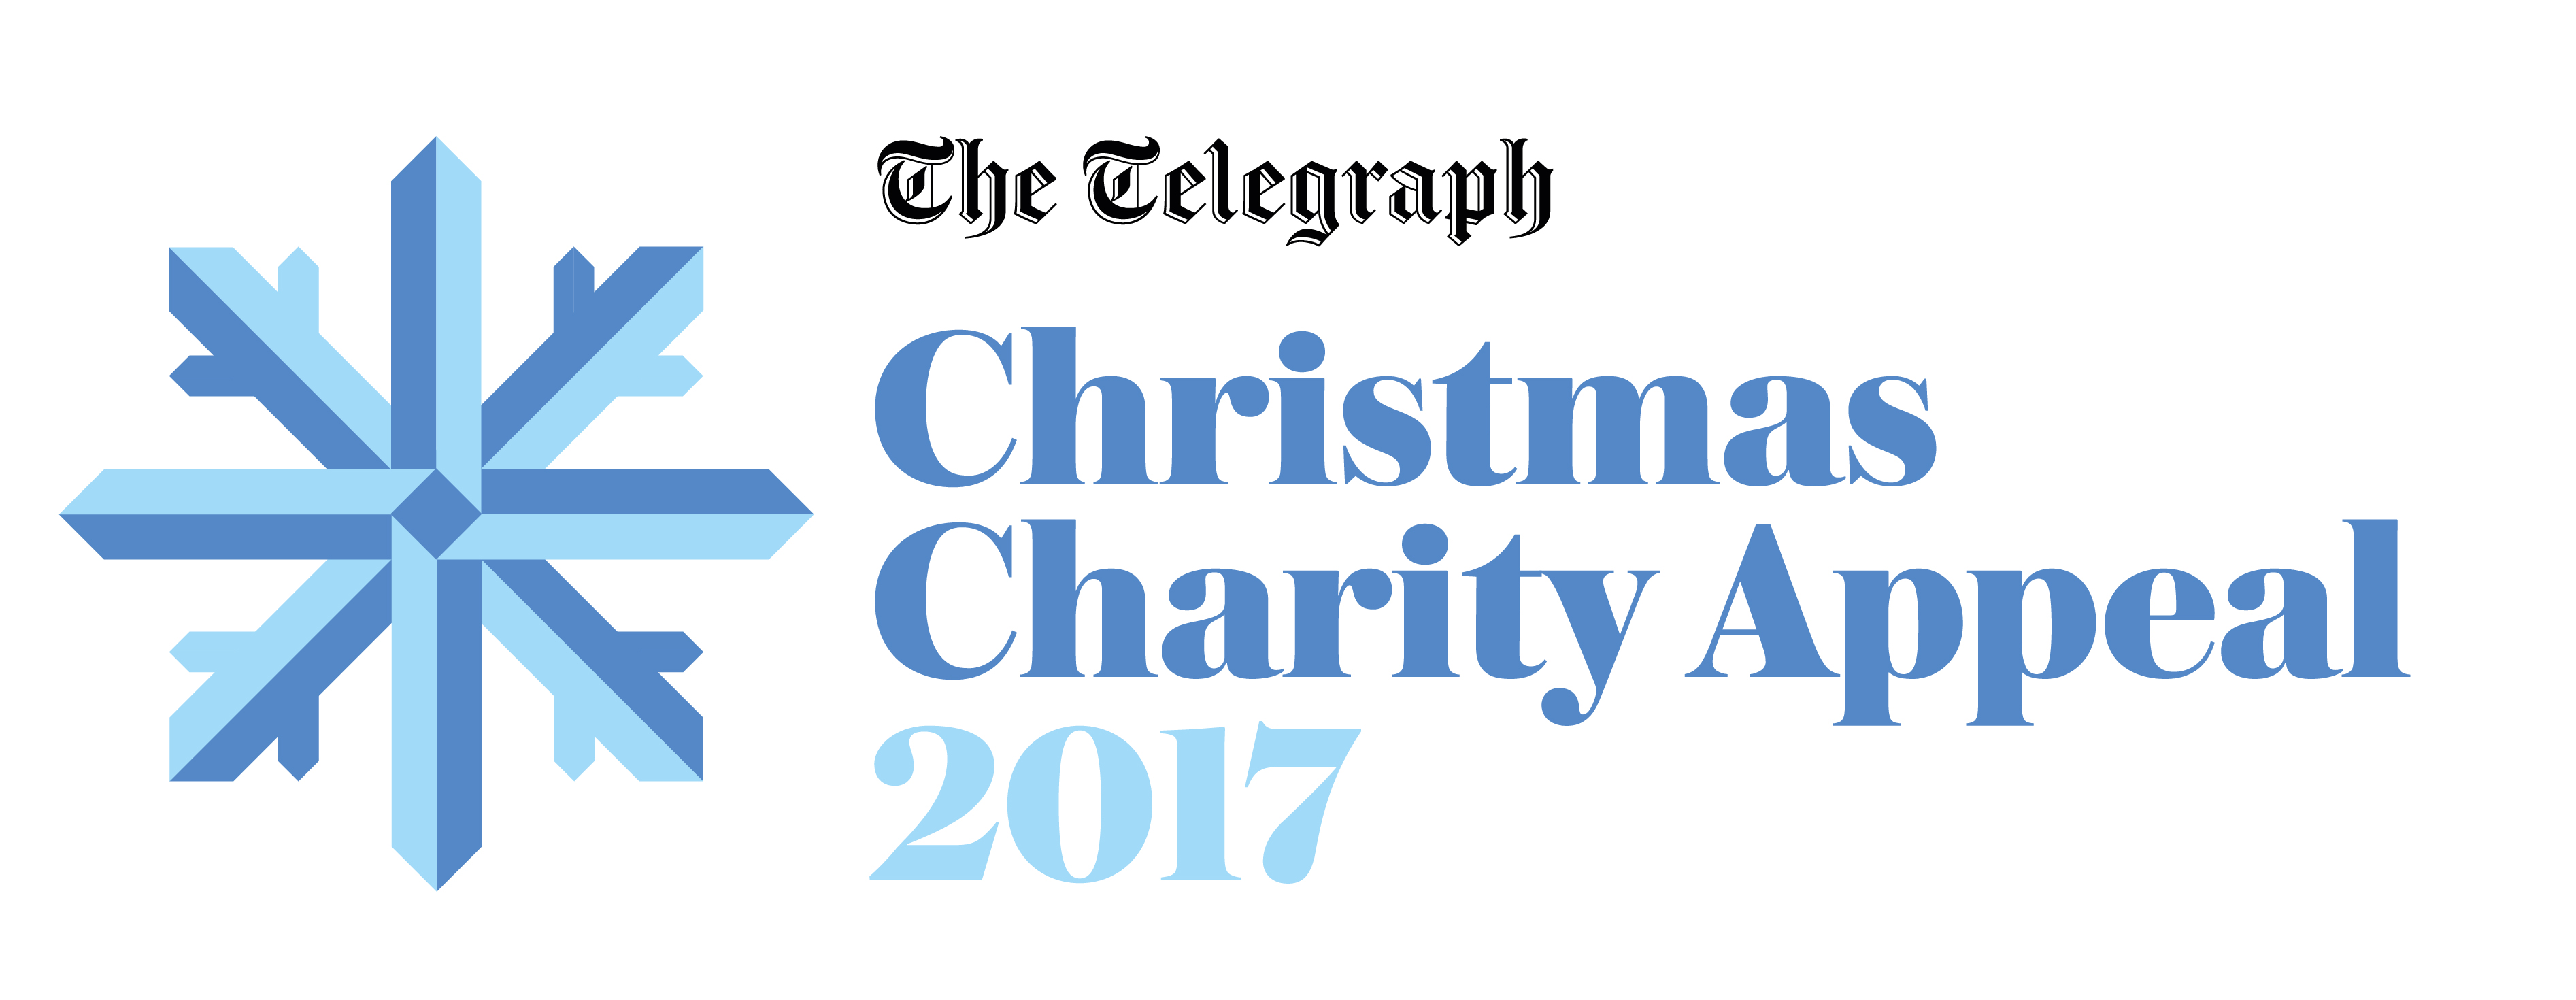 Telegraph Christmas Charity Appeal 2017 Identity